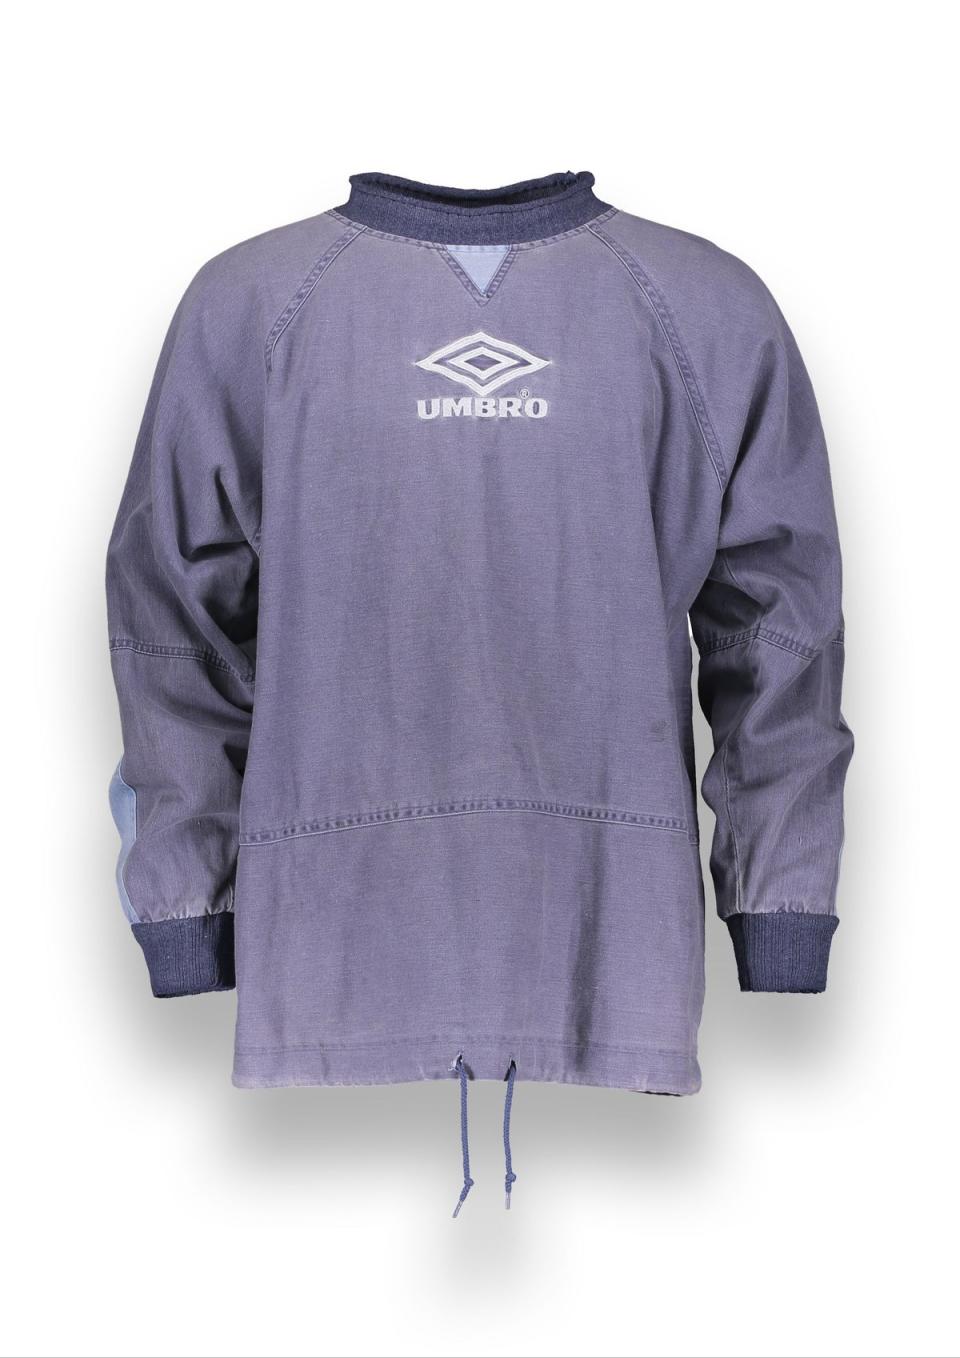 The Spring Summer 1996 drill top identical to the one worn by Liam Gallagher when Oasis played at Manchester City FC’s Maine Road stadium in April 1996 (UMBRO)